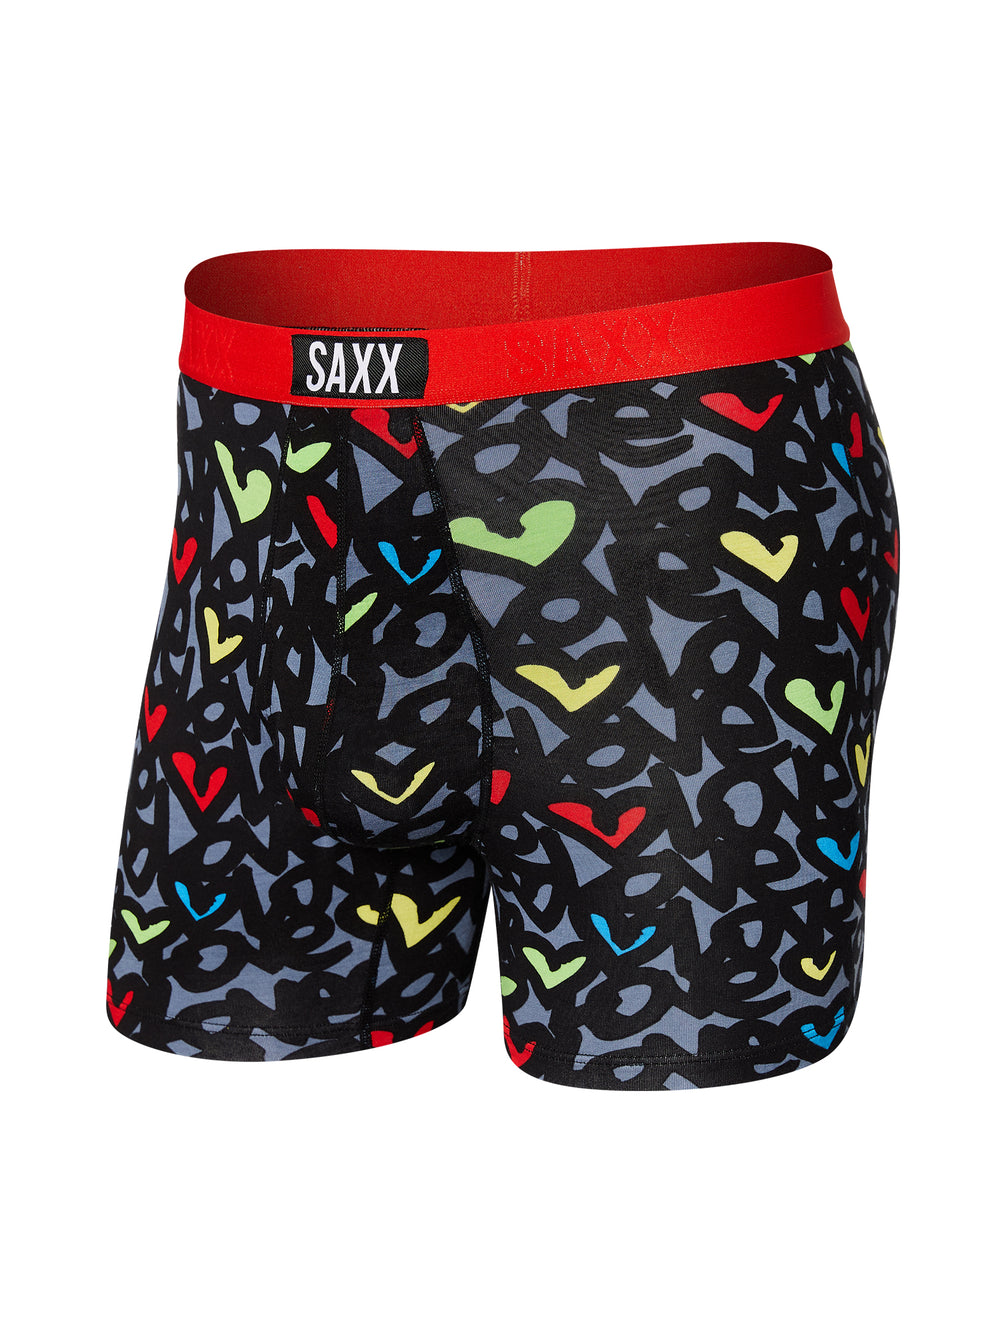 SAXX ULTRA BOXER BRIEF - LOVE IS ALL - DÉSTOCKAGE